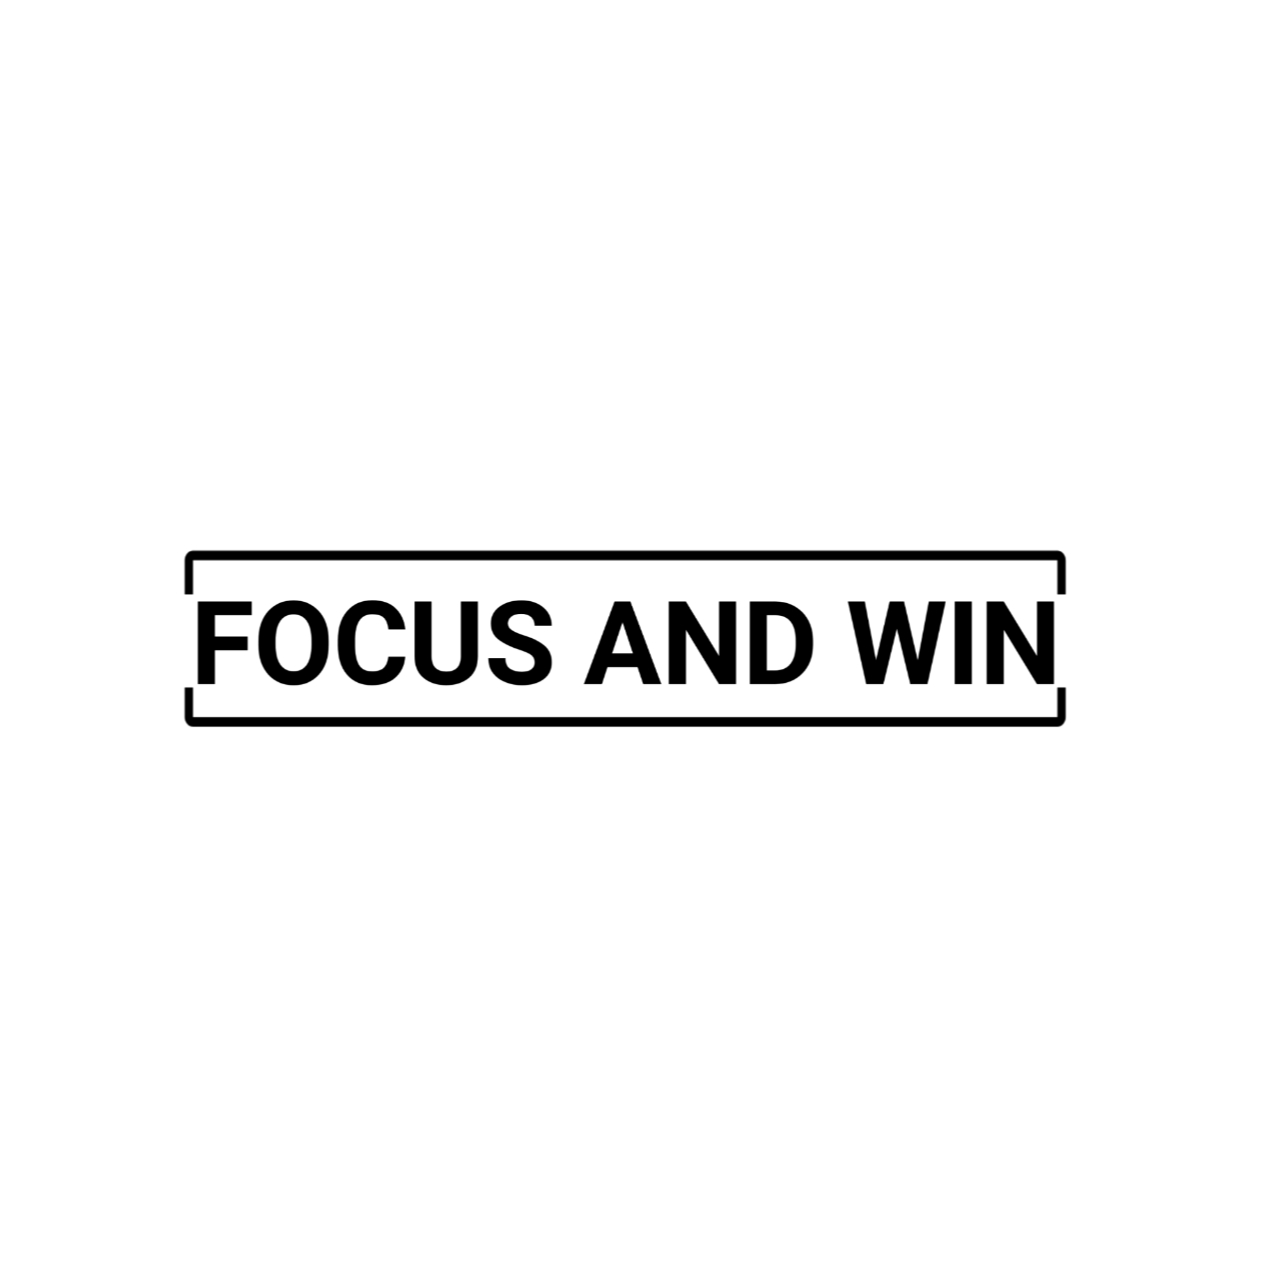 Focus and Win Typography T-shirts Design preview image.